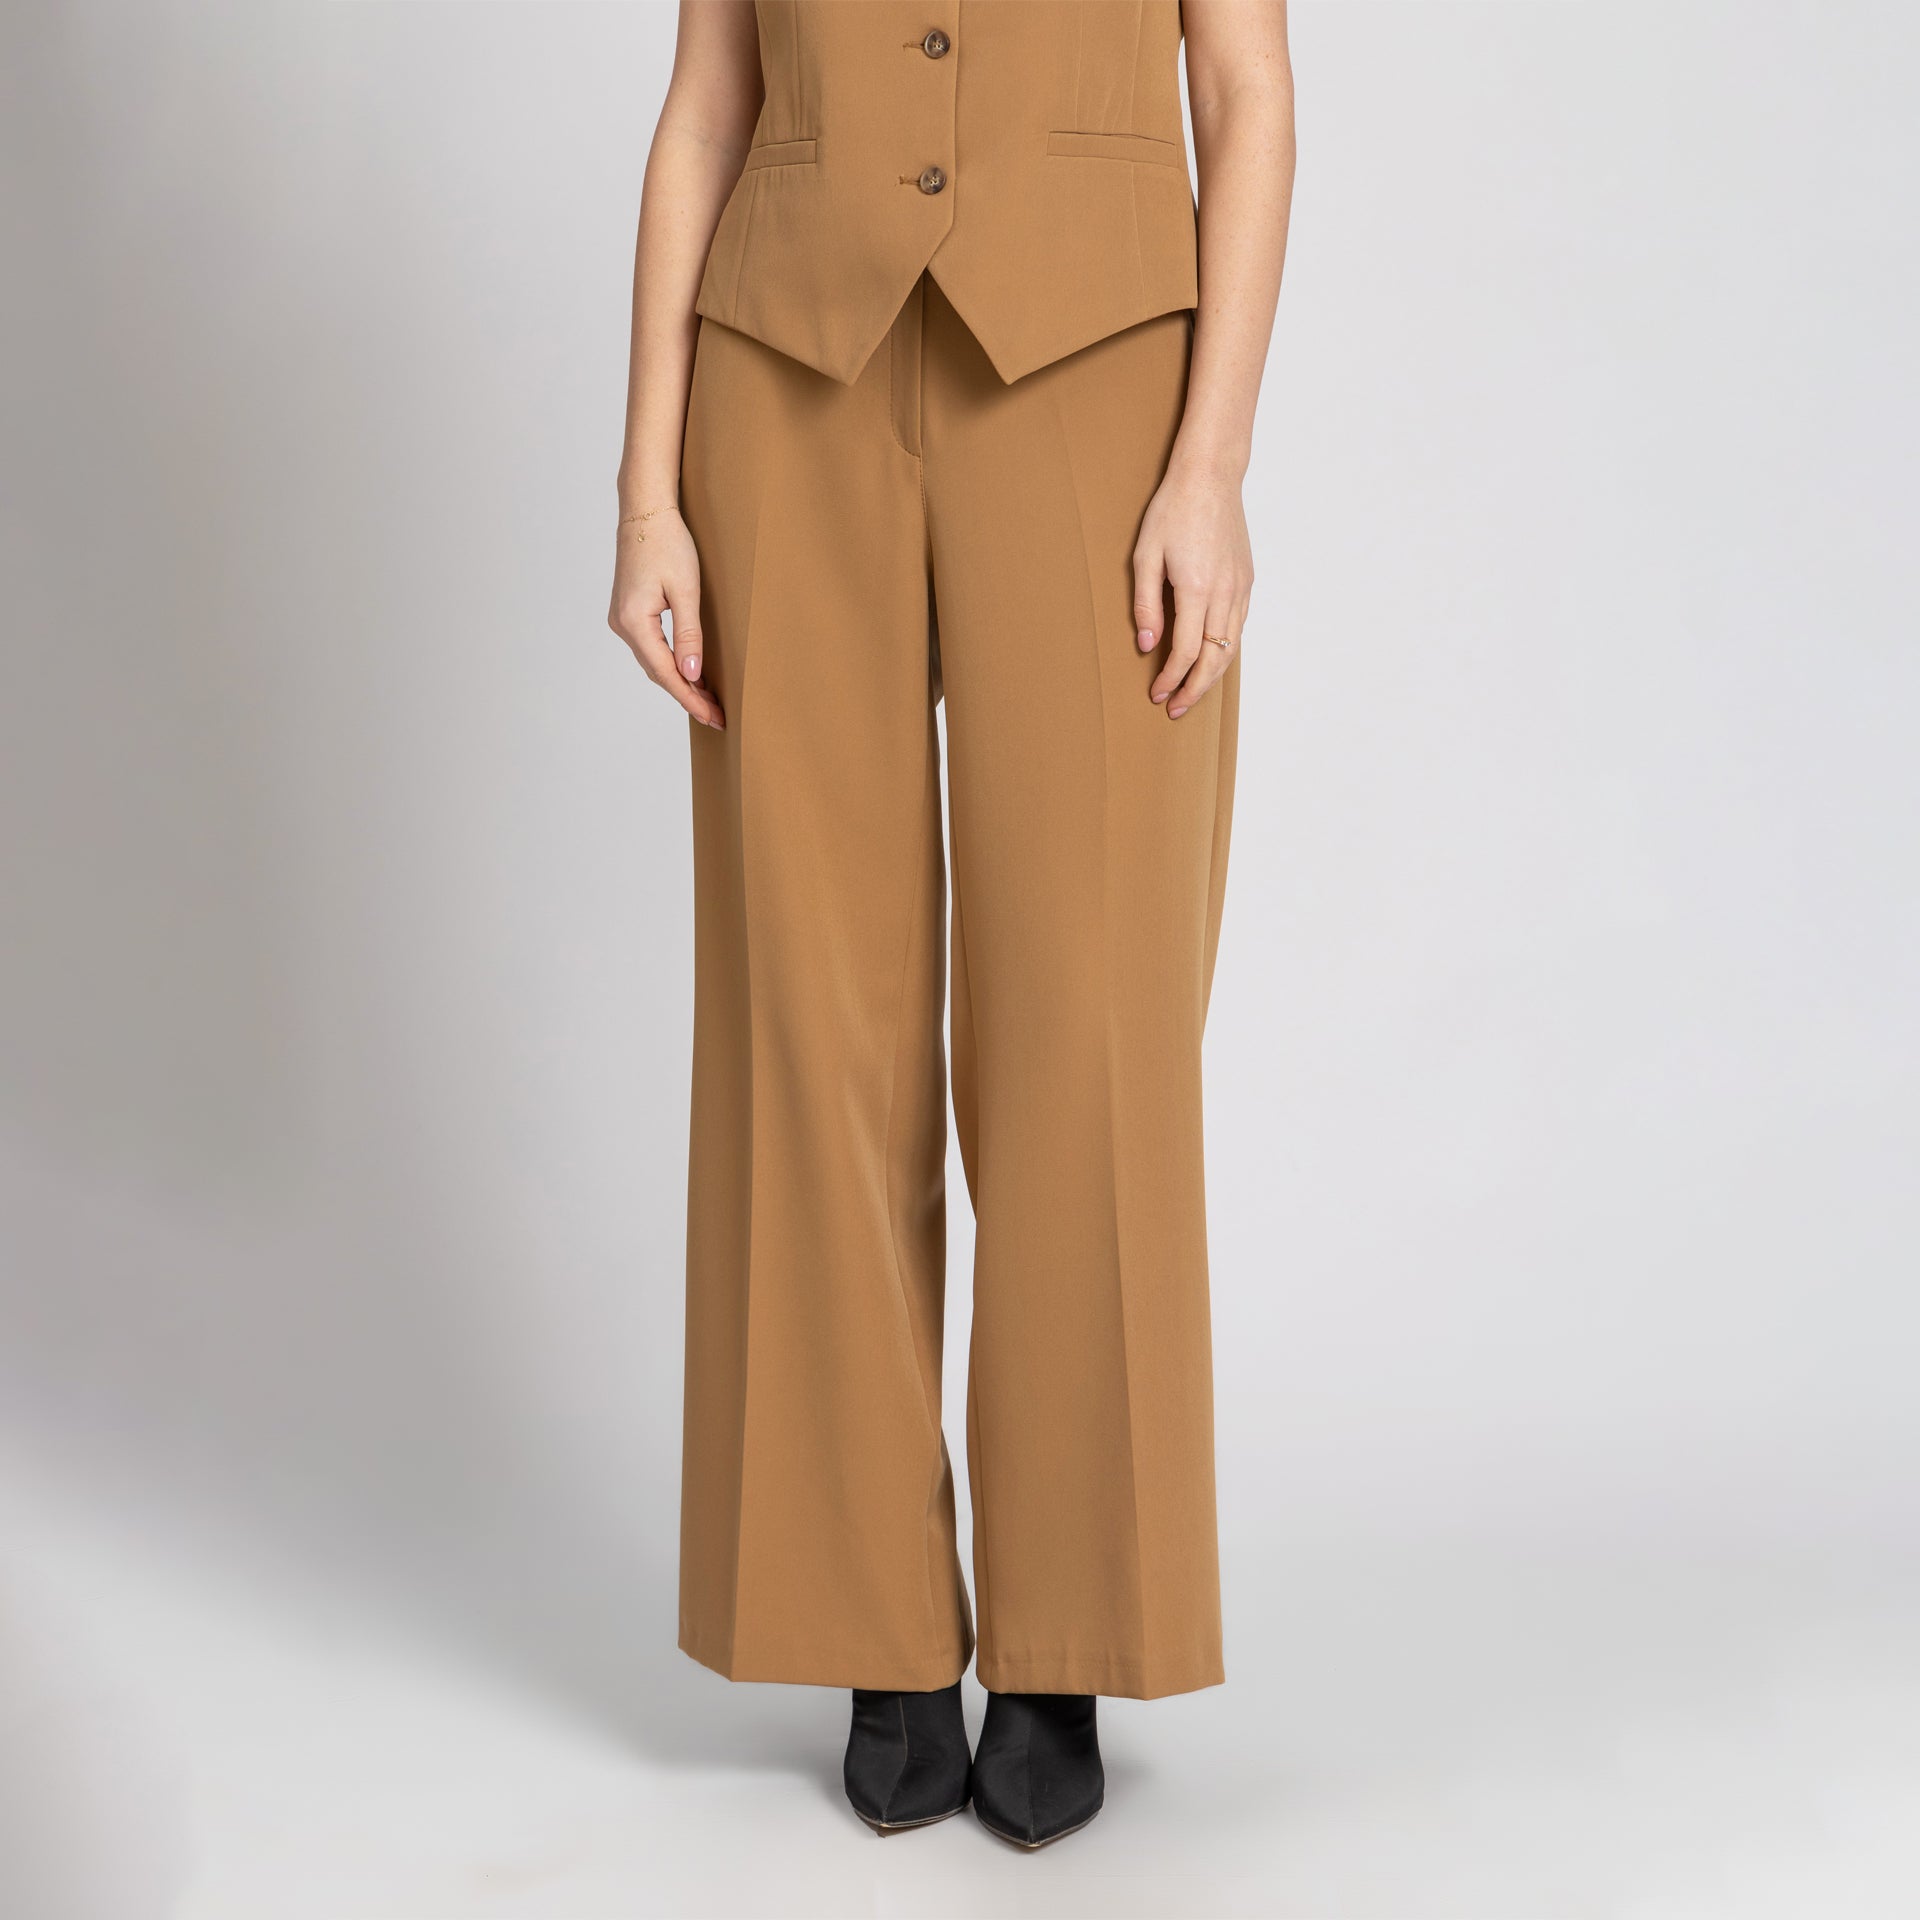 Beige Straight-Cut Formal Crepe Trousers From Elanove